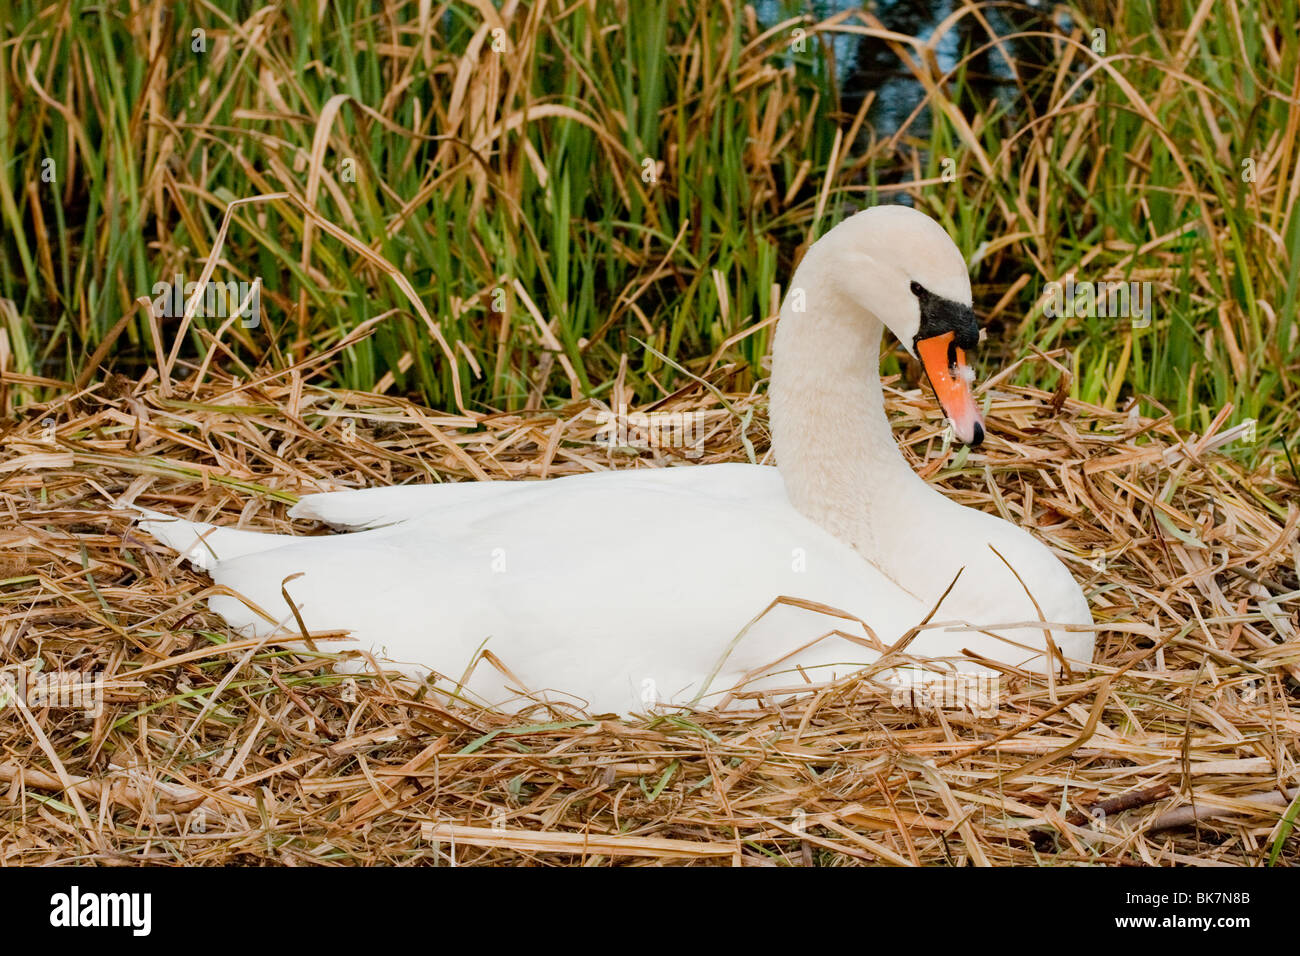 Swan on nest with eggs in an urban environment Stock Photo